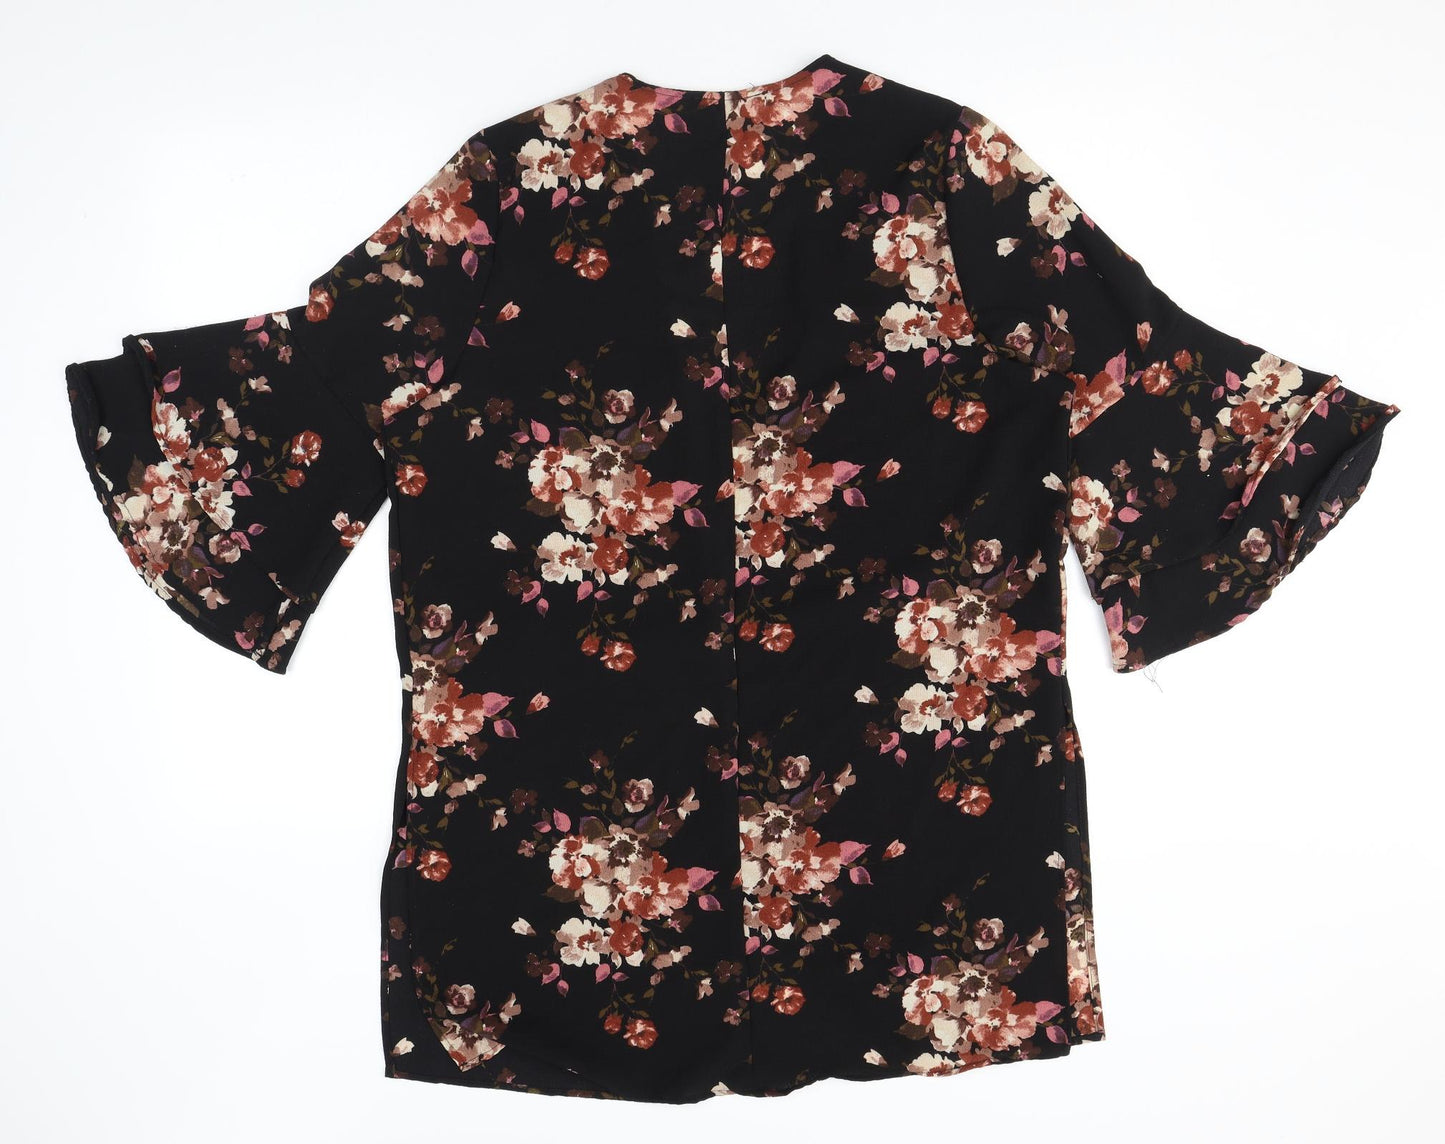 Style Therapy Womens Black Floral Polyester Kimono Blouse Size M V-Neck - Flared Sleeve